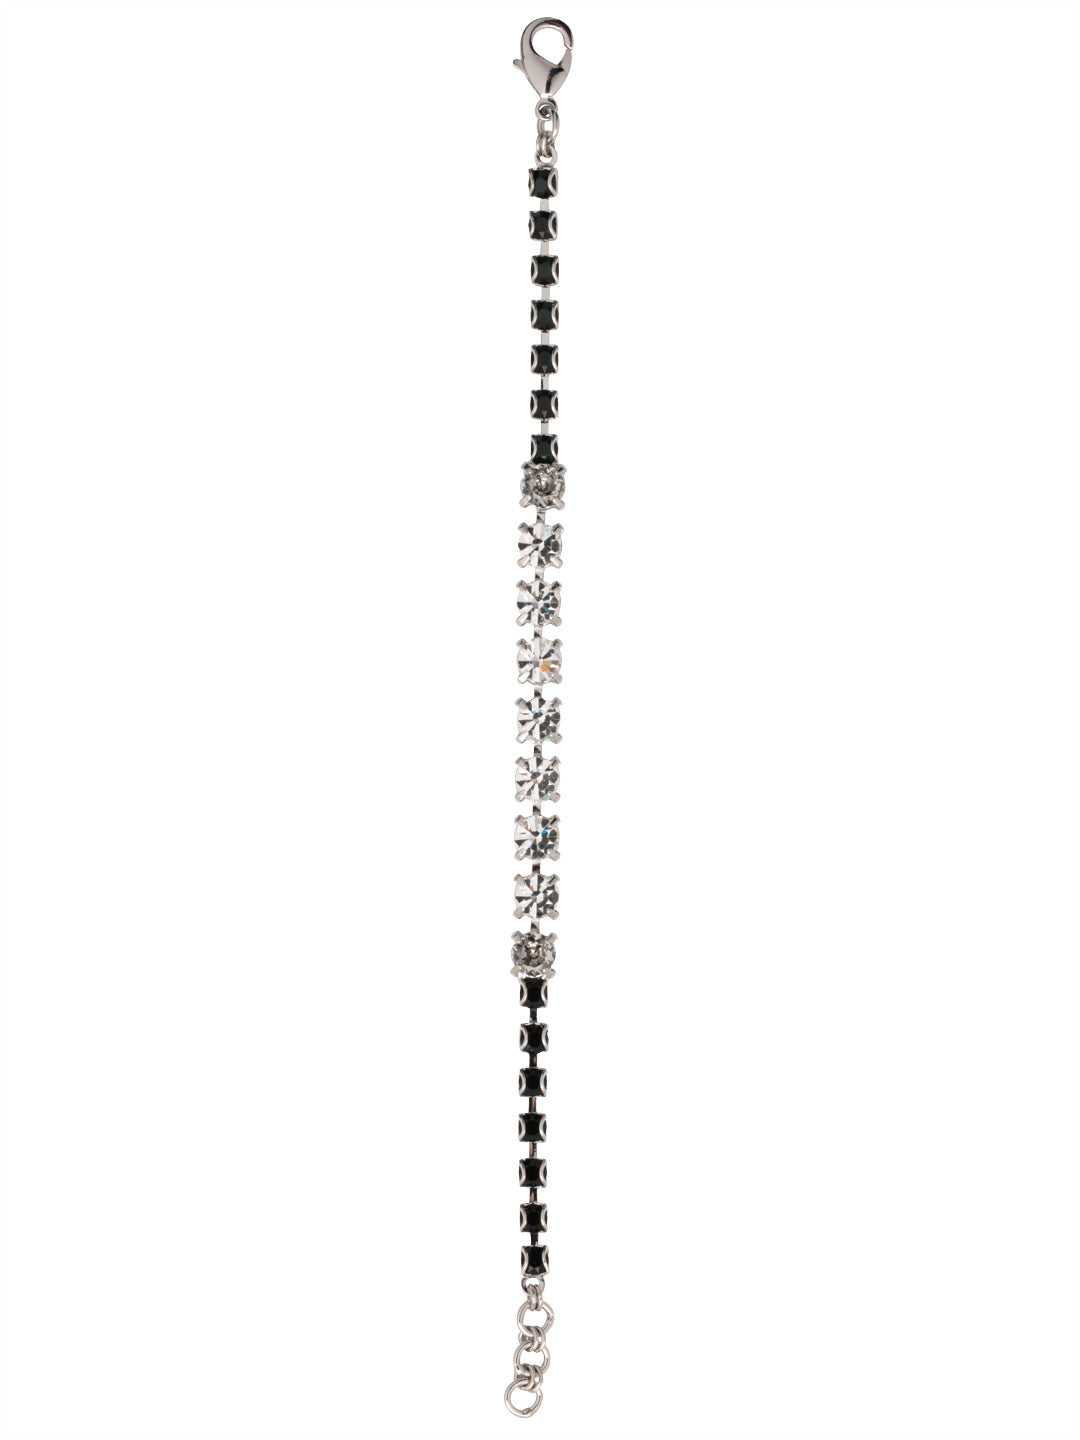 Shaughna Tennis Bracelet - BET38PDSNI - <p>The Shaughna Tennis Bracelet is a versatile piece that is sure to suit sparkle lovers. Its round crystal stones shine in an assortment of shades. It's just the piece to take your outfit up a notch. From Sorrelli's Starry Night collection in our Palladium finish.</p>